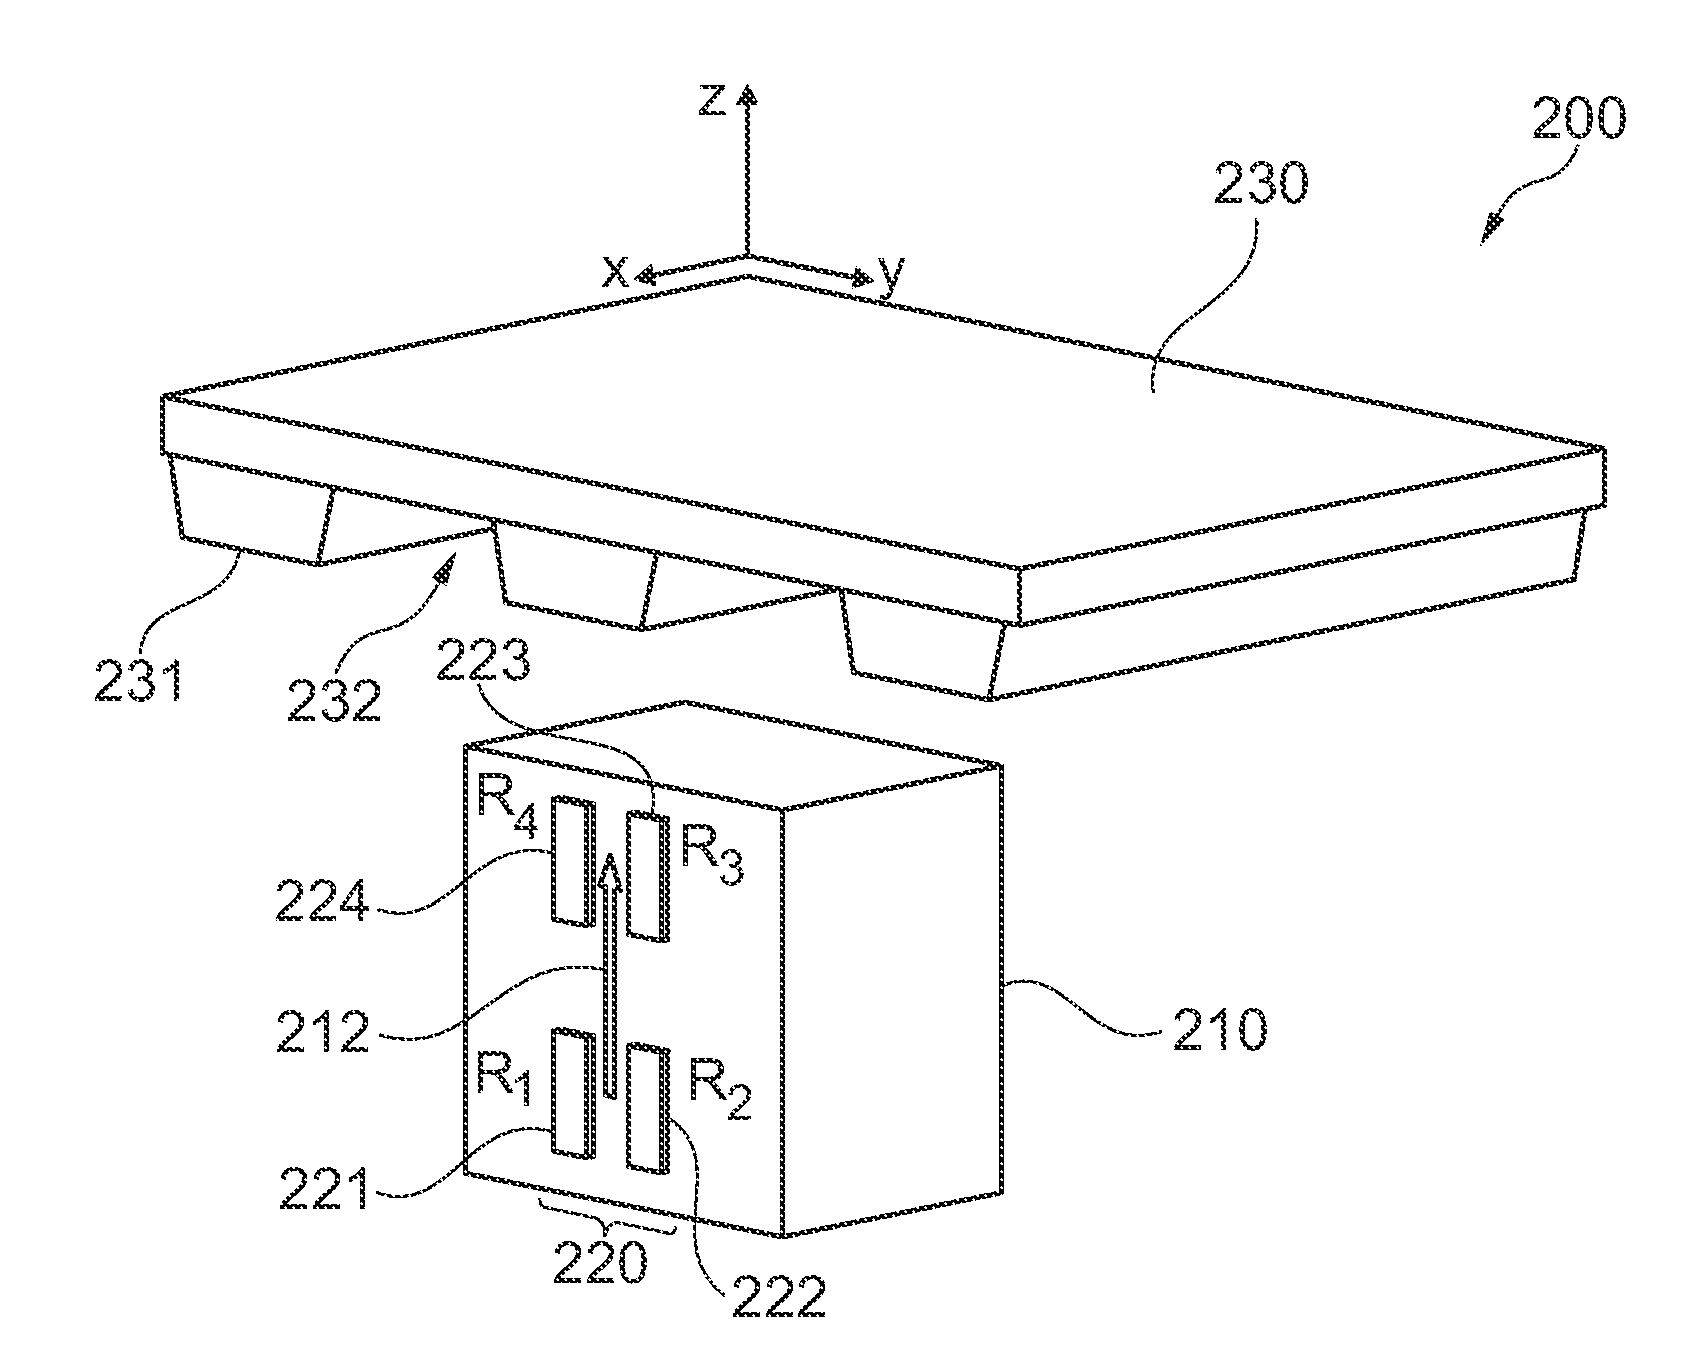 Magnetic field sensor system with a magnetic wheel rotatable around a wheel axis and with magnetic sensor elements being arranged within a plane perpendicular to the wheel axis